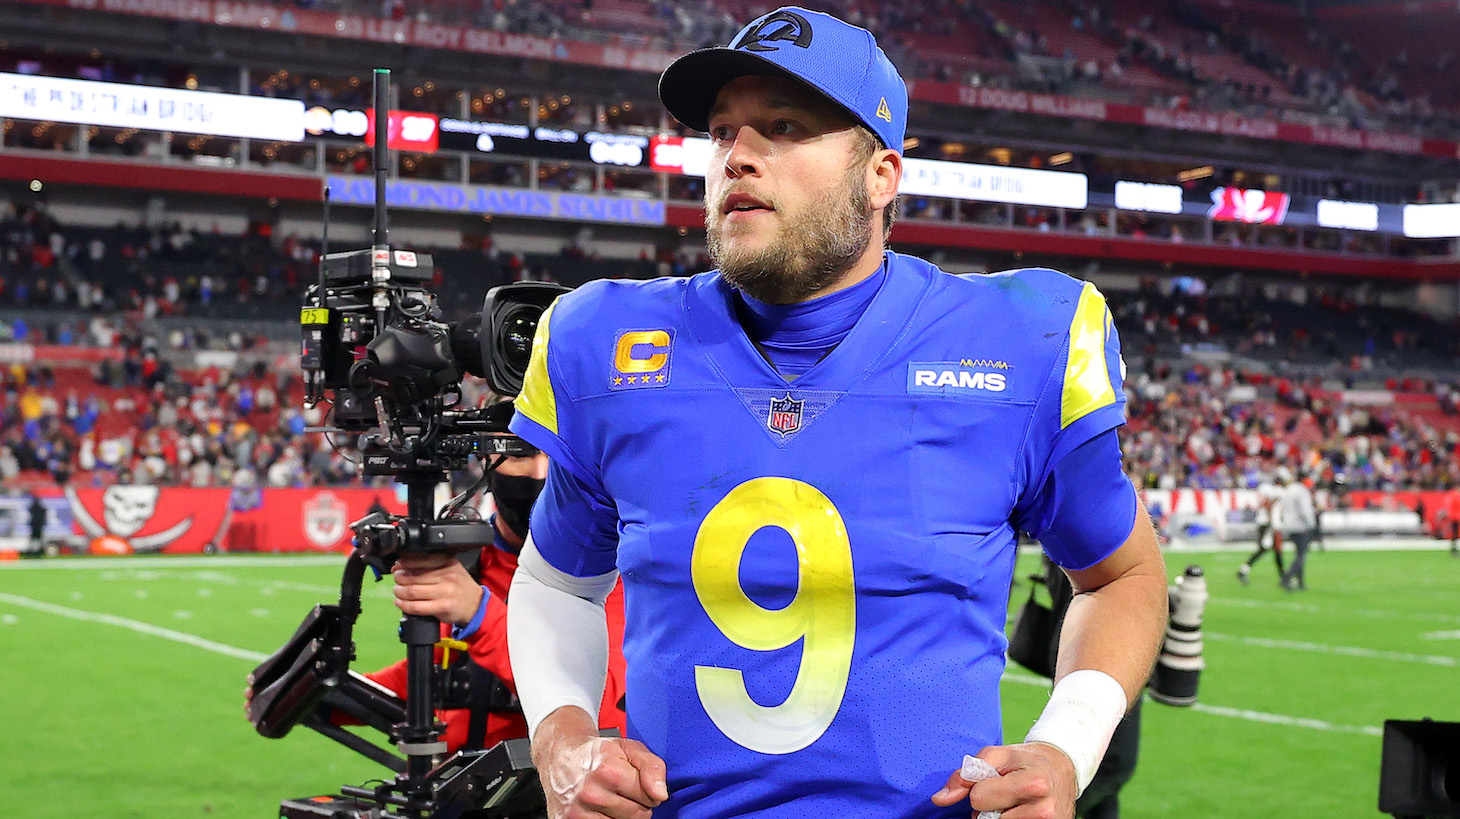 TAMPA, FLORIDA - JANUARY 23: Matthew Stafford #9 of the Los Angeles Rams runs off the field after defeating the Tampa Bay Buccaneers 30-27 in the NFC Divisional Playoff game at Raymond James Stadium on January 23, 2022 in Tampa, Florida. (Photo by Kevin C. Cox/Getty Images)